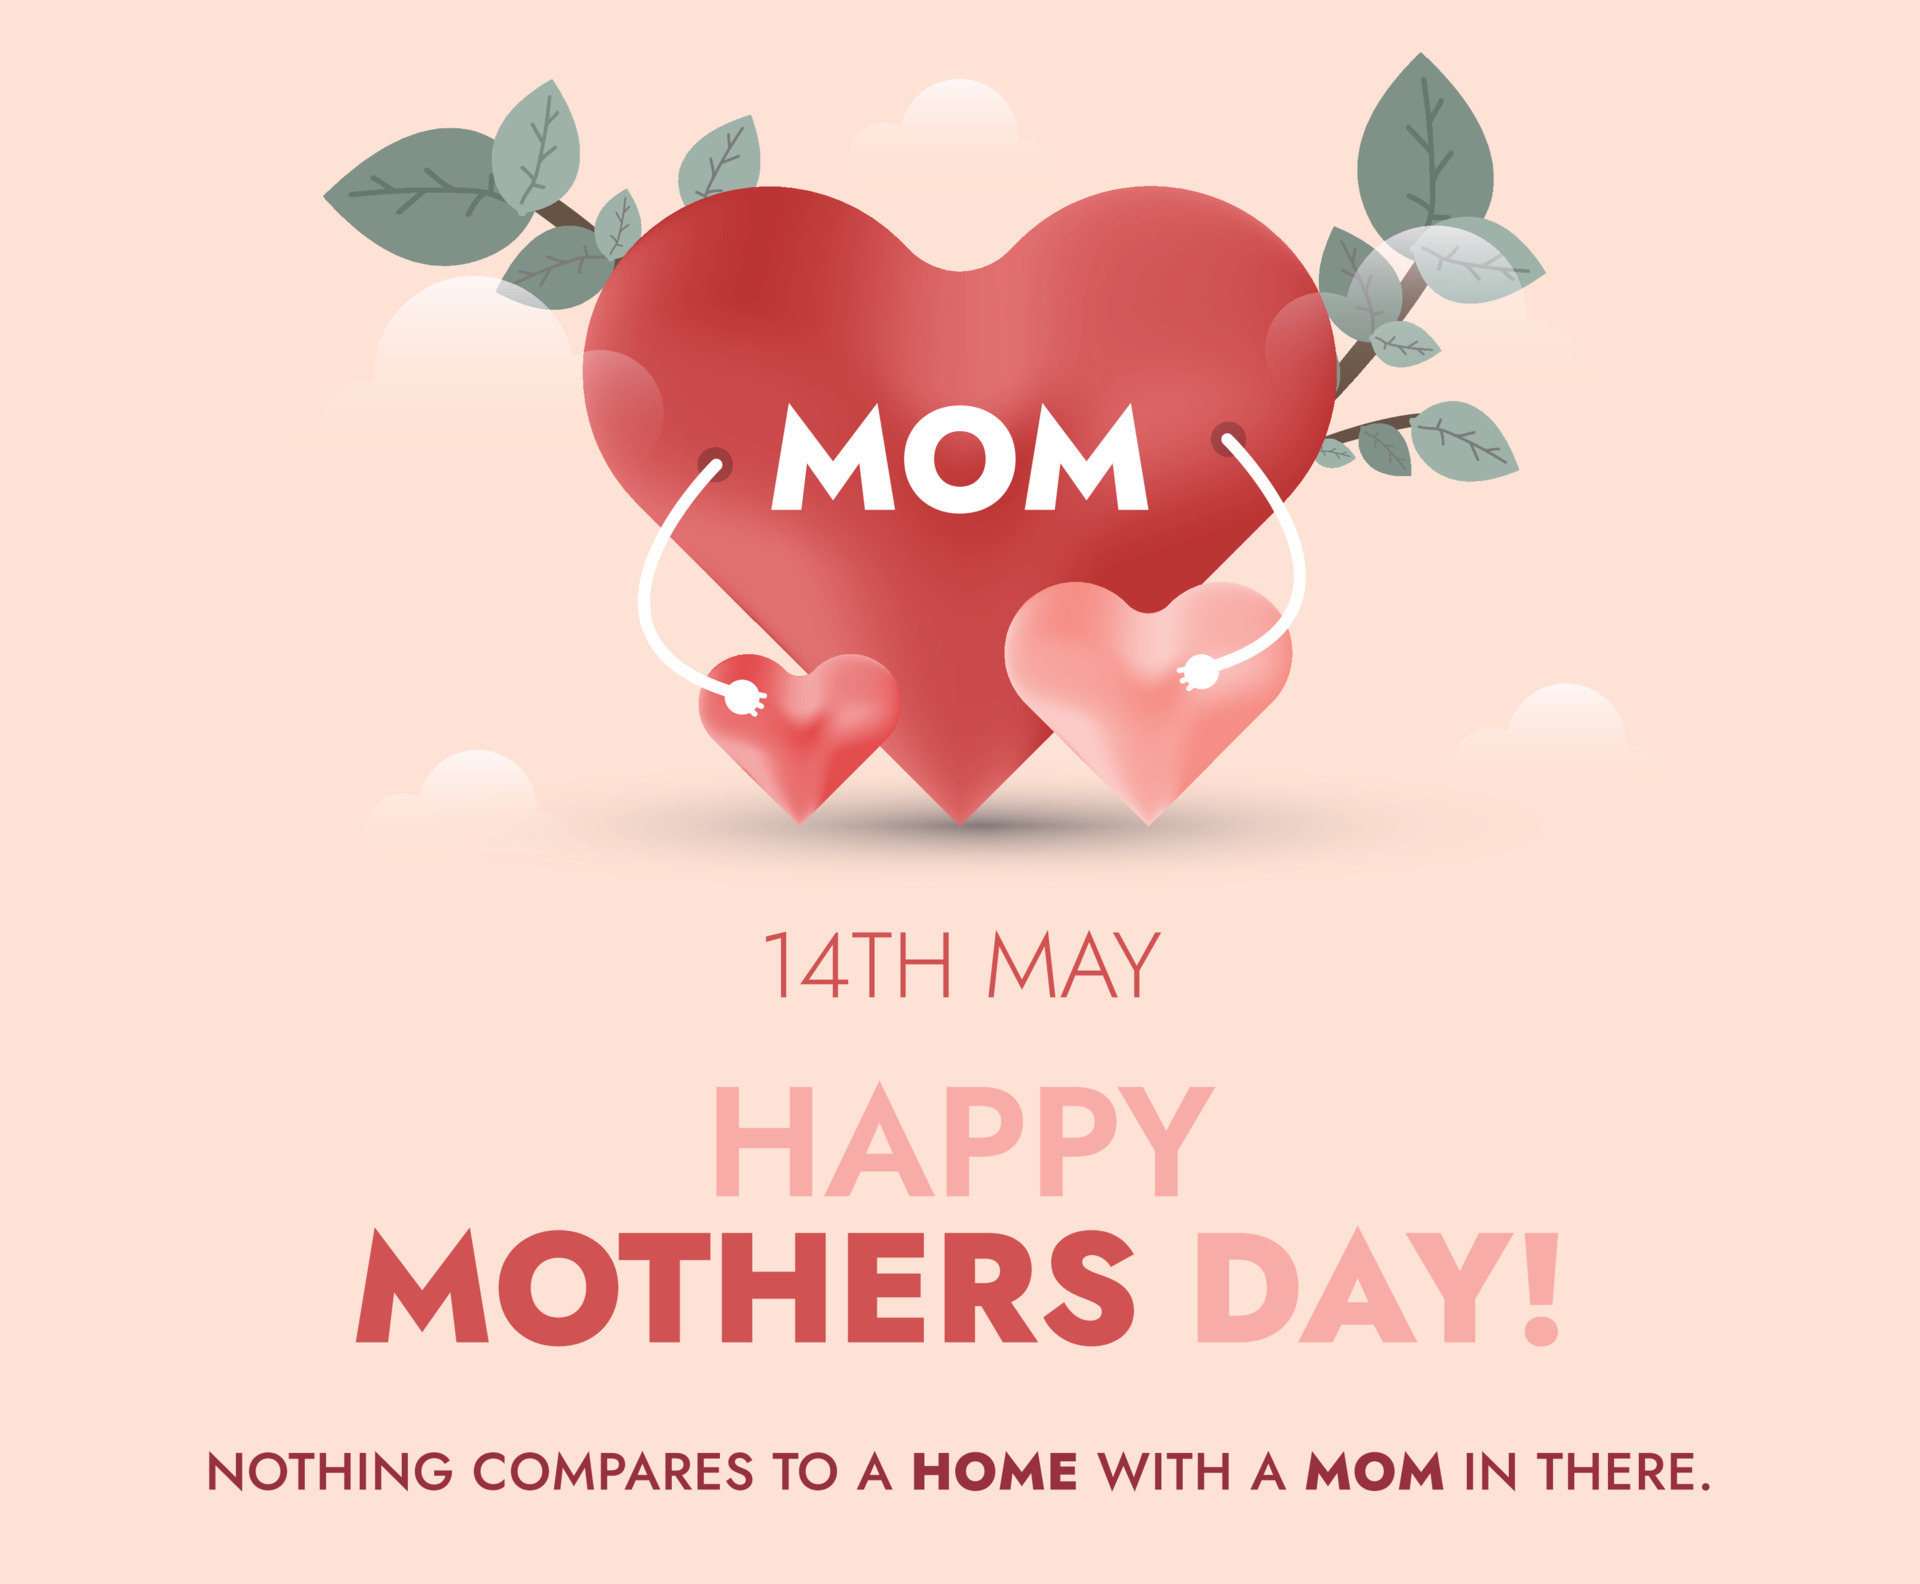 https://static.vecteezy.com/system/resources/previews/023/455/599/original/happy-mother-s-day-happy-mothers-day-2023-cover-or-banner-with-family-hearts-14th-may-mom-with-her-children-s-mother-day-card-design-template-for-social-media-post-mother-day-greeting-card-vector.jpg